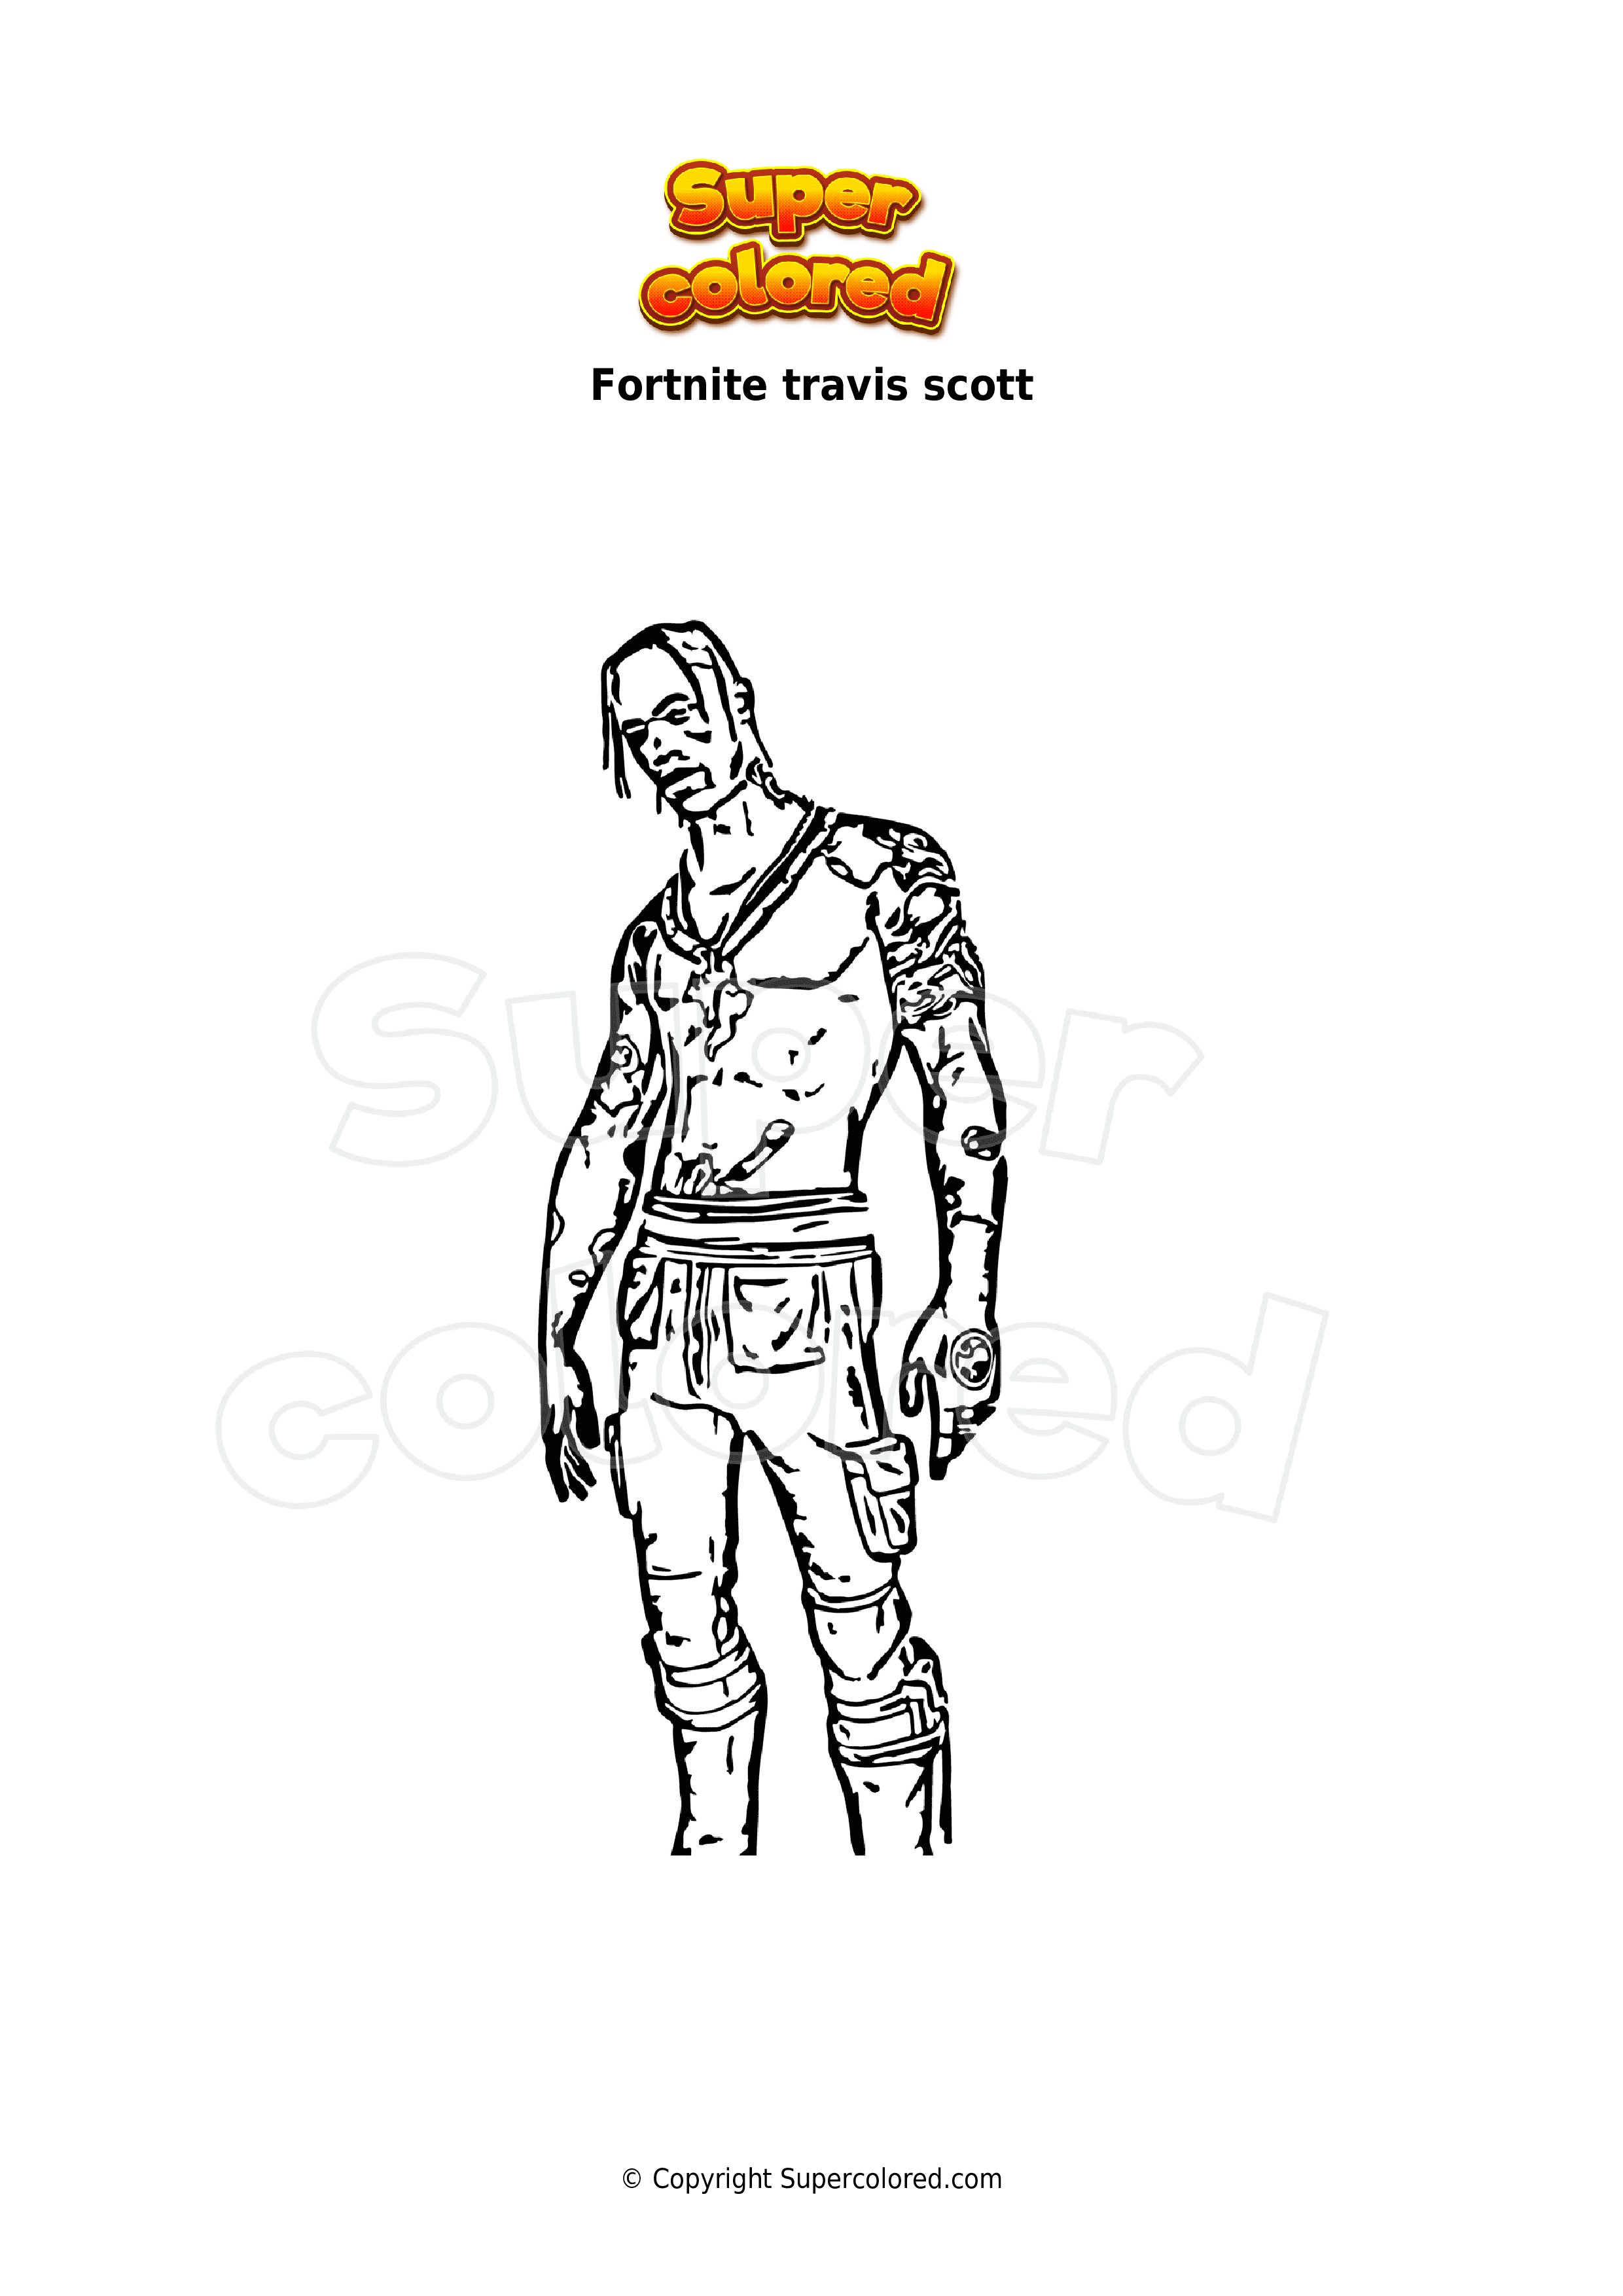 Travis Scott Fortnite Coloring Page | Images and Photos finder